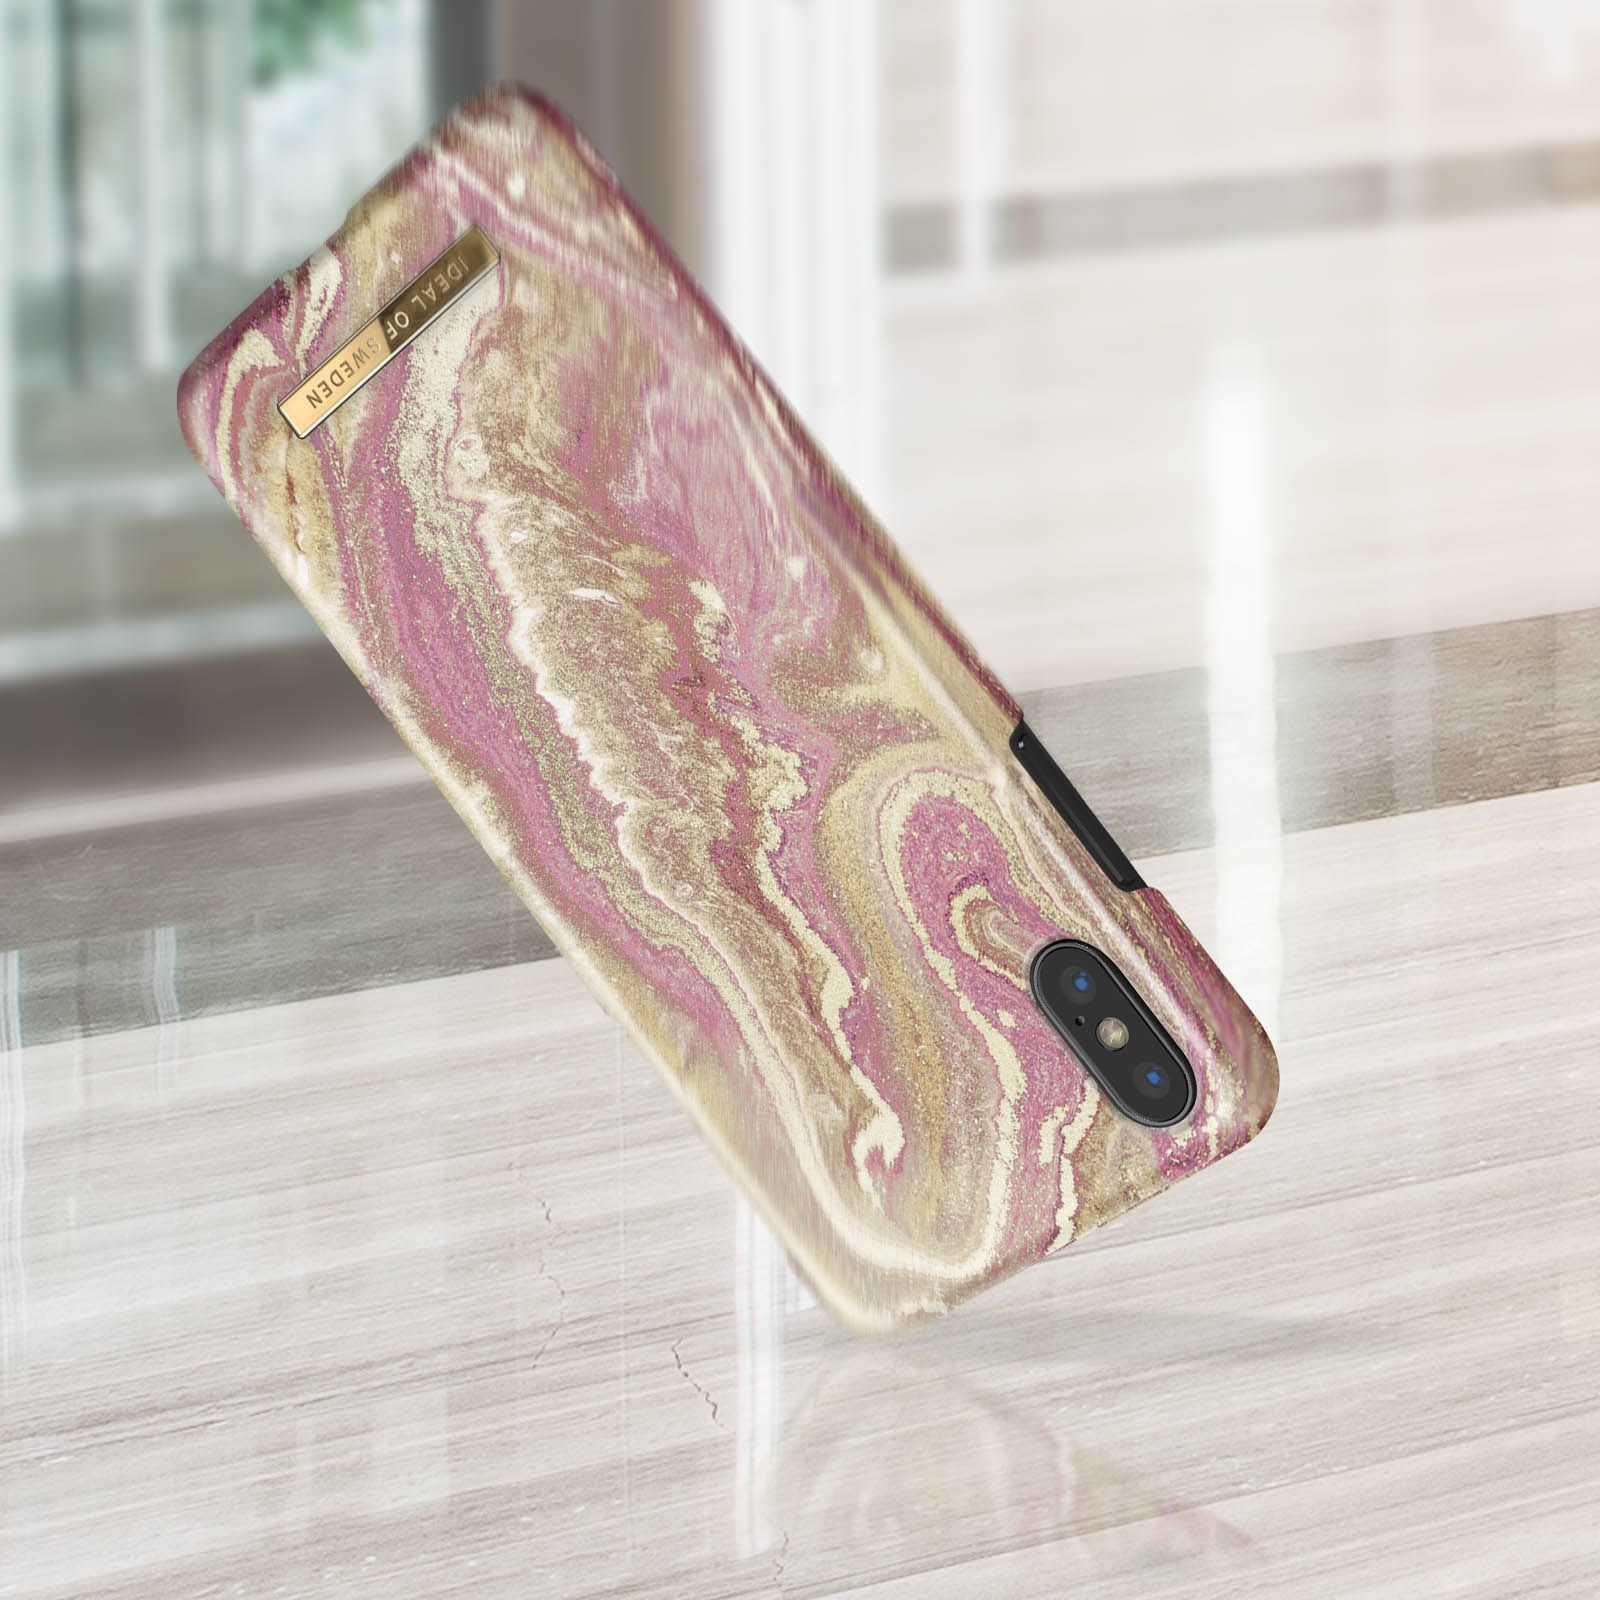 IDEAL OF IPhone Blush Apple, Golden SWEDEN IDFCSS19-IXS-120, Marble Backcover, X/XS